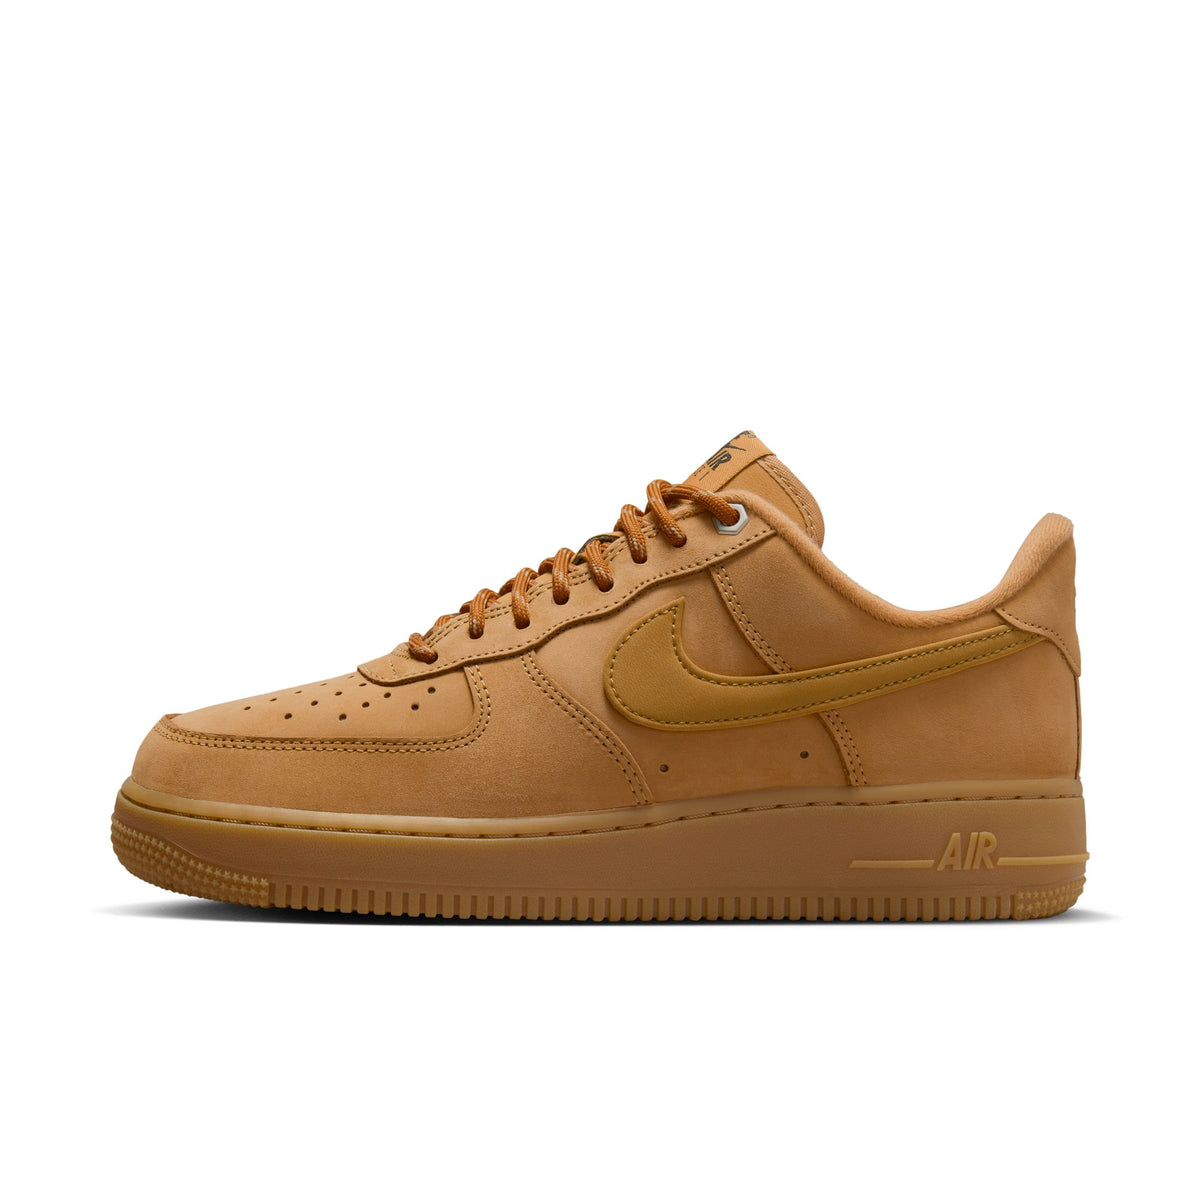 WMNS Nike Air Force 1 Low '07 "Flax Wheat"